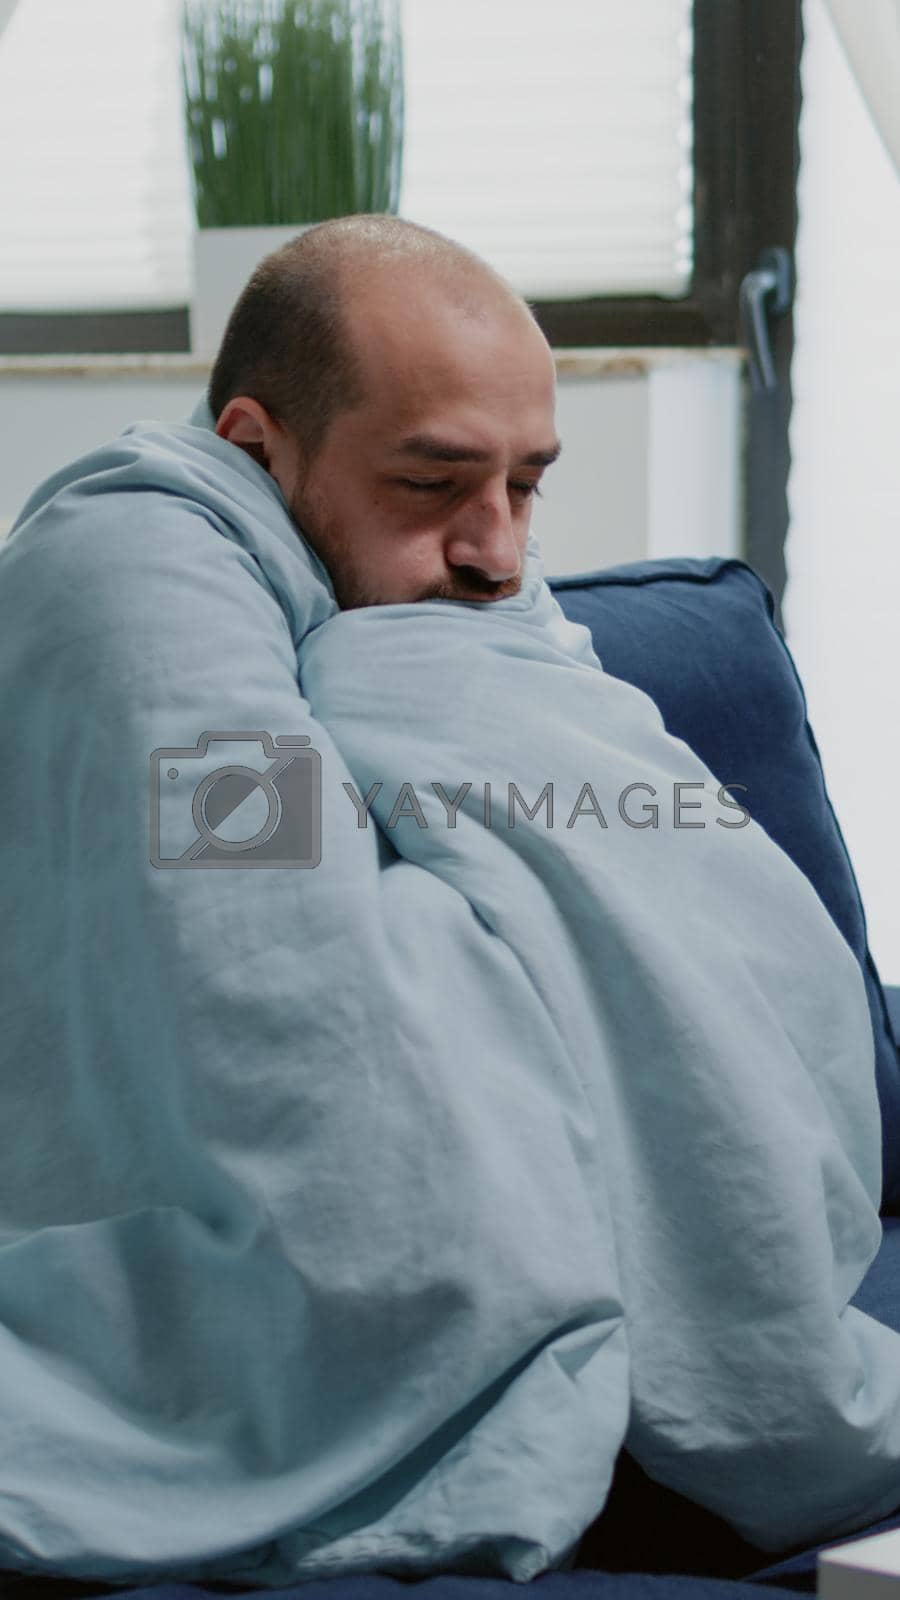 Royalty free image of Person with flu feeling cold and shivering wrapped in blanket by DCStudio